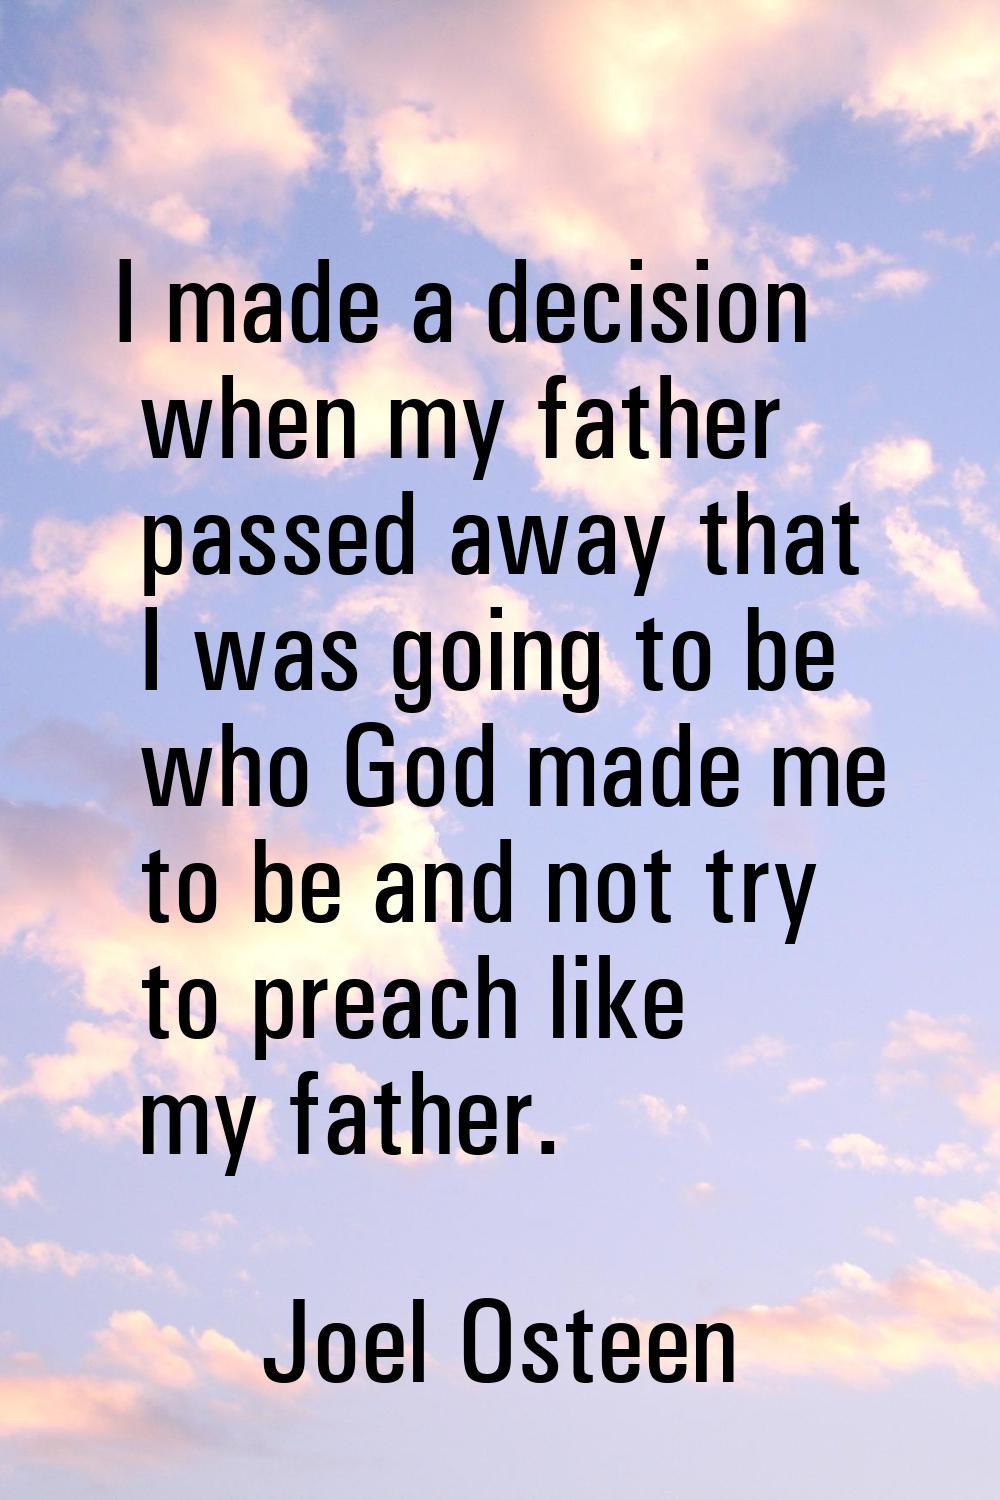 I made a decision when my father passed away that I was going to be who God made me to be and not t